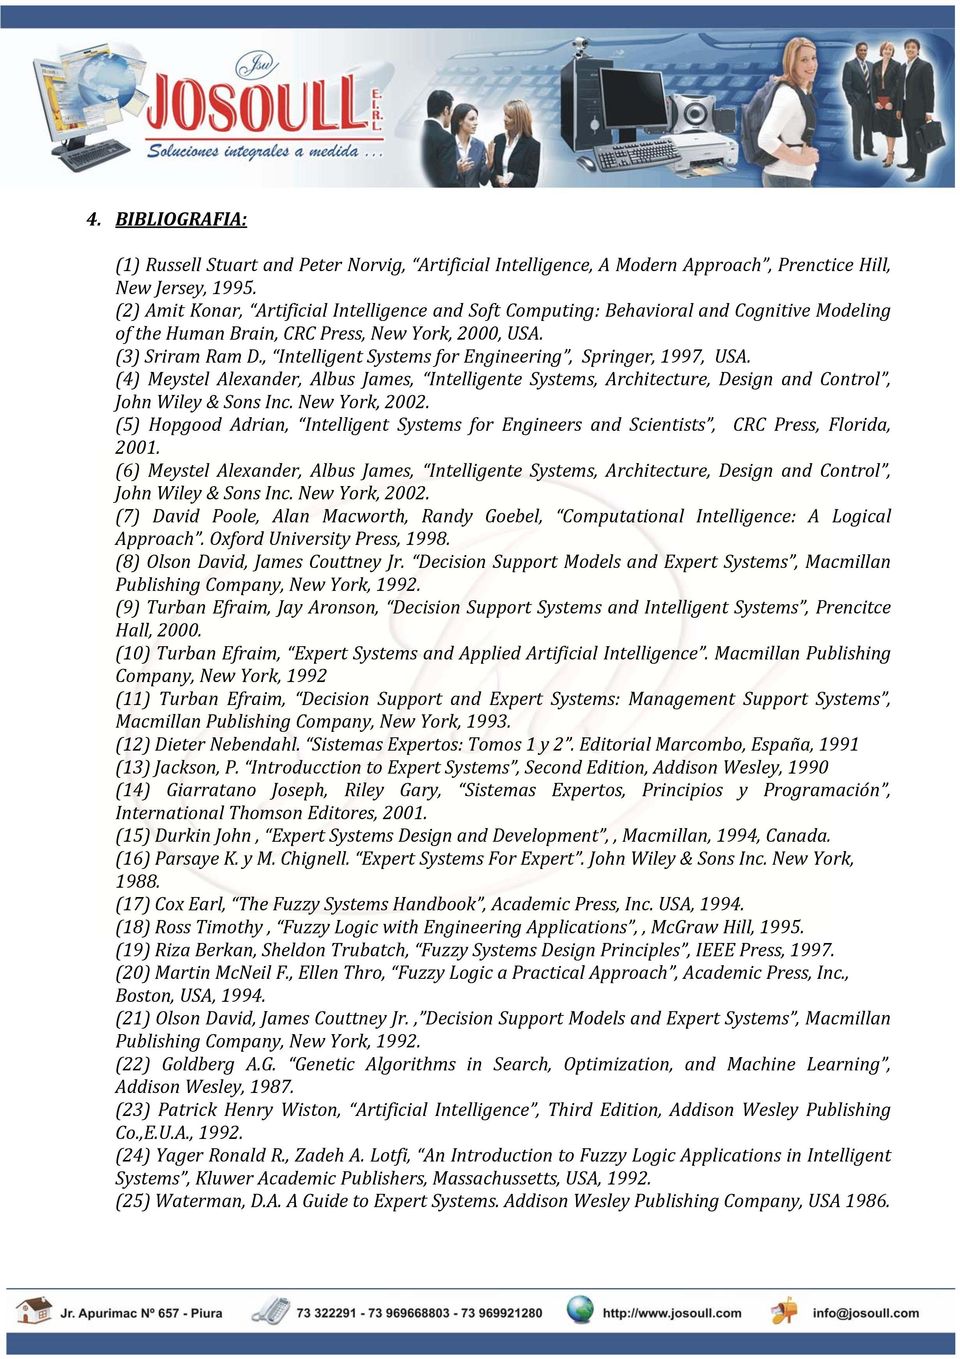 , Intelligent Systems for Engineering, Springer, 1997, USA. (4) Meystel Alexander, Albus James, Intelligente Systems, Architecture, Design and Control, John Wiley & Sons Inc. New York, 2002.